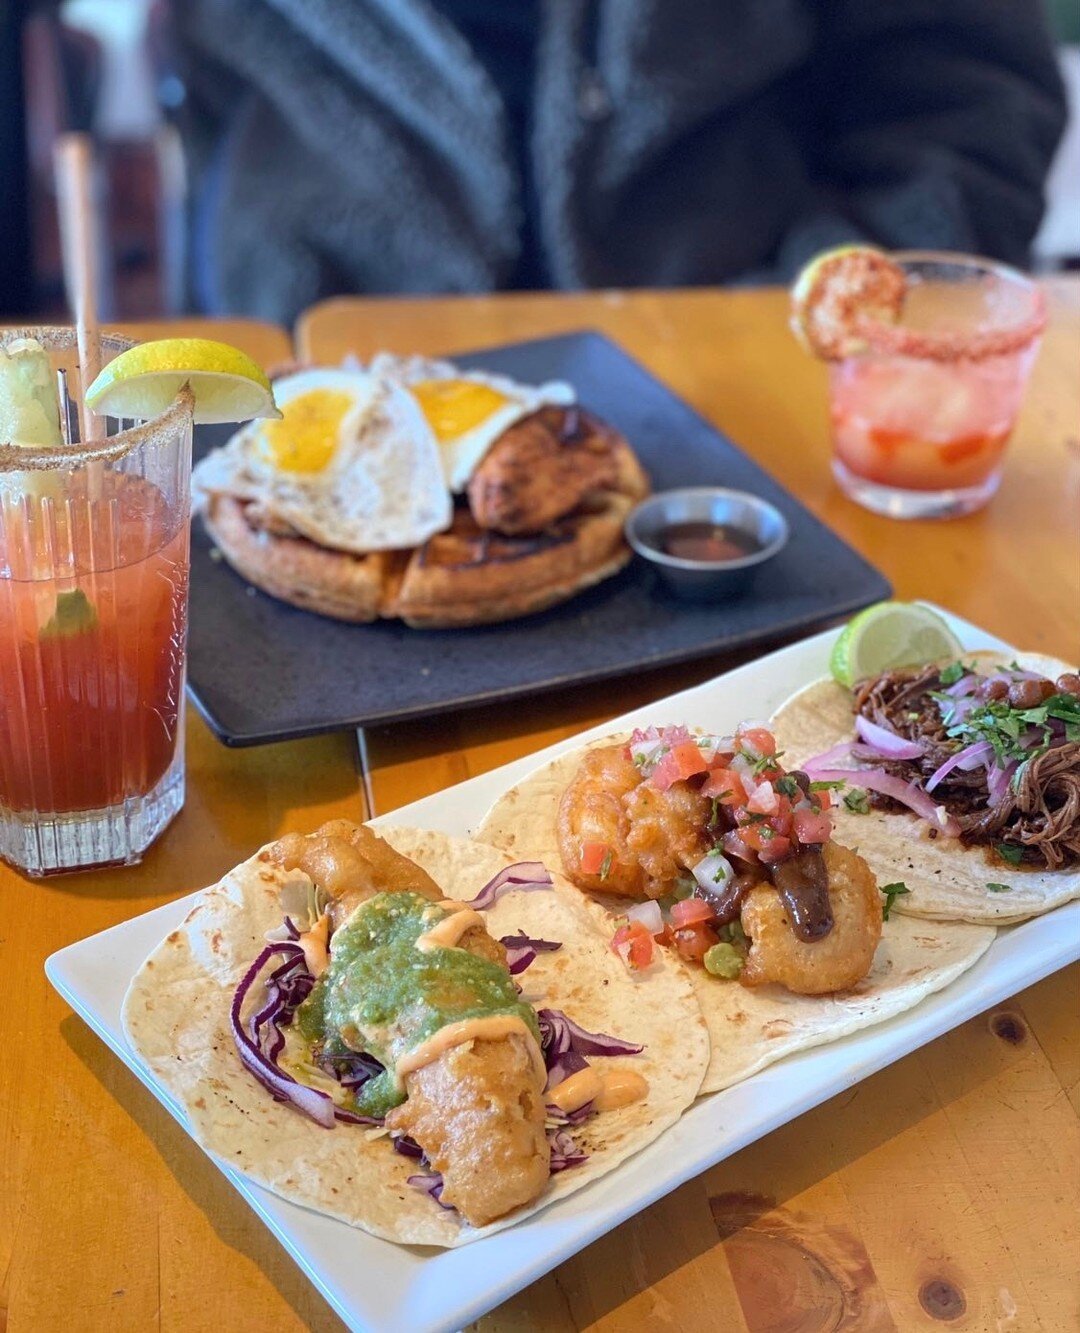 Options for every bruncher 🍳🌮⁠ // Trio de tacos - Choose any 3 for 17!⁠
⁠
📸 @my_vancity⁠
⁠
#Brunch #Vancouver #VancouverBrunch #VancouverEats #Dished #DishedVan #DishedVancouver #VancouverFoodie #Foodie #VancouverEggs #Breakfast #VancouverBreakfas